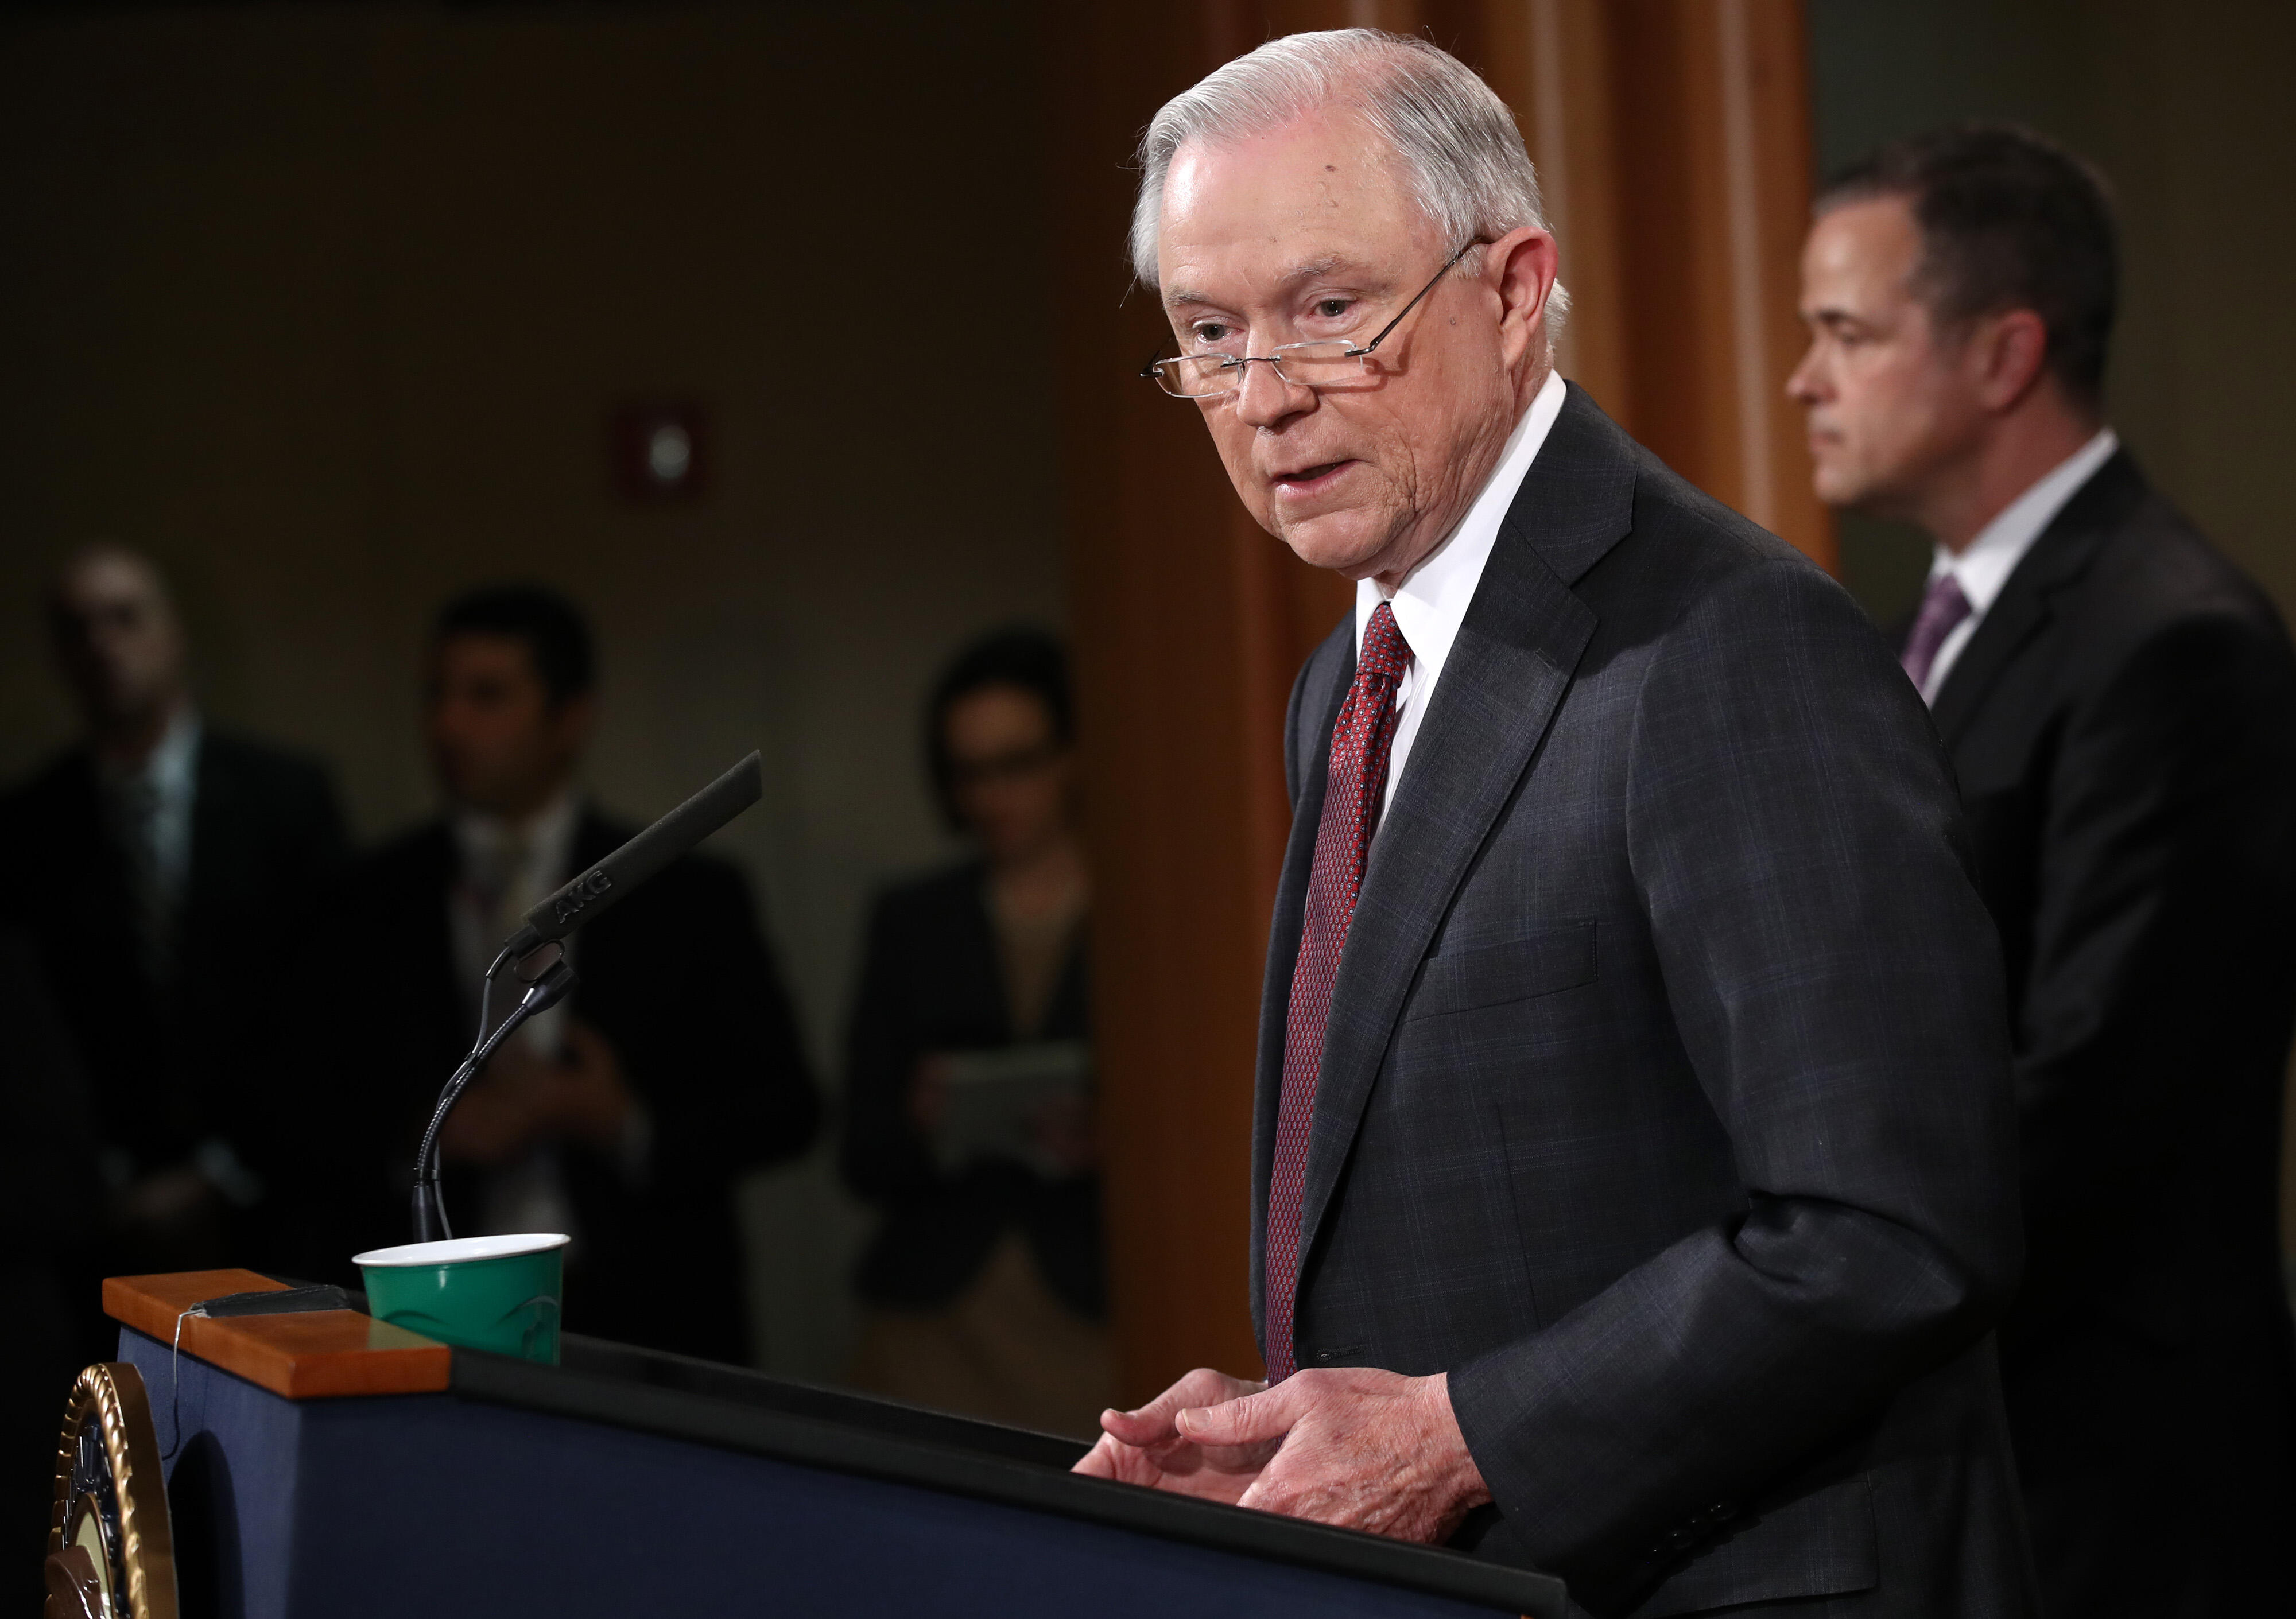 WASHINGTON, DC - MARCH 02:   U.S. Attorney General Jeff Sessions speaks during a press conference at  the Department of Justice on March 2, 2017 in Washington, DC.   Sessions addressed the calls for him to recuse himself from Russia investigations  after 